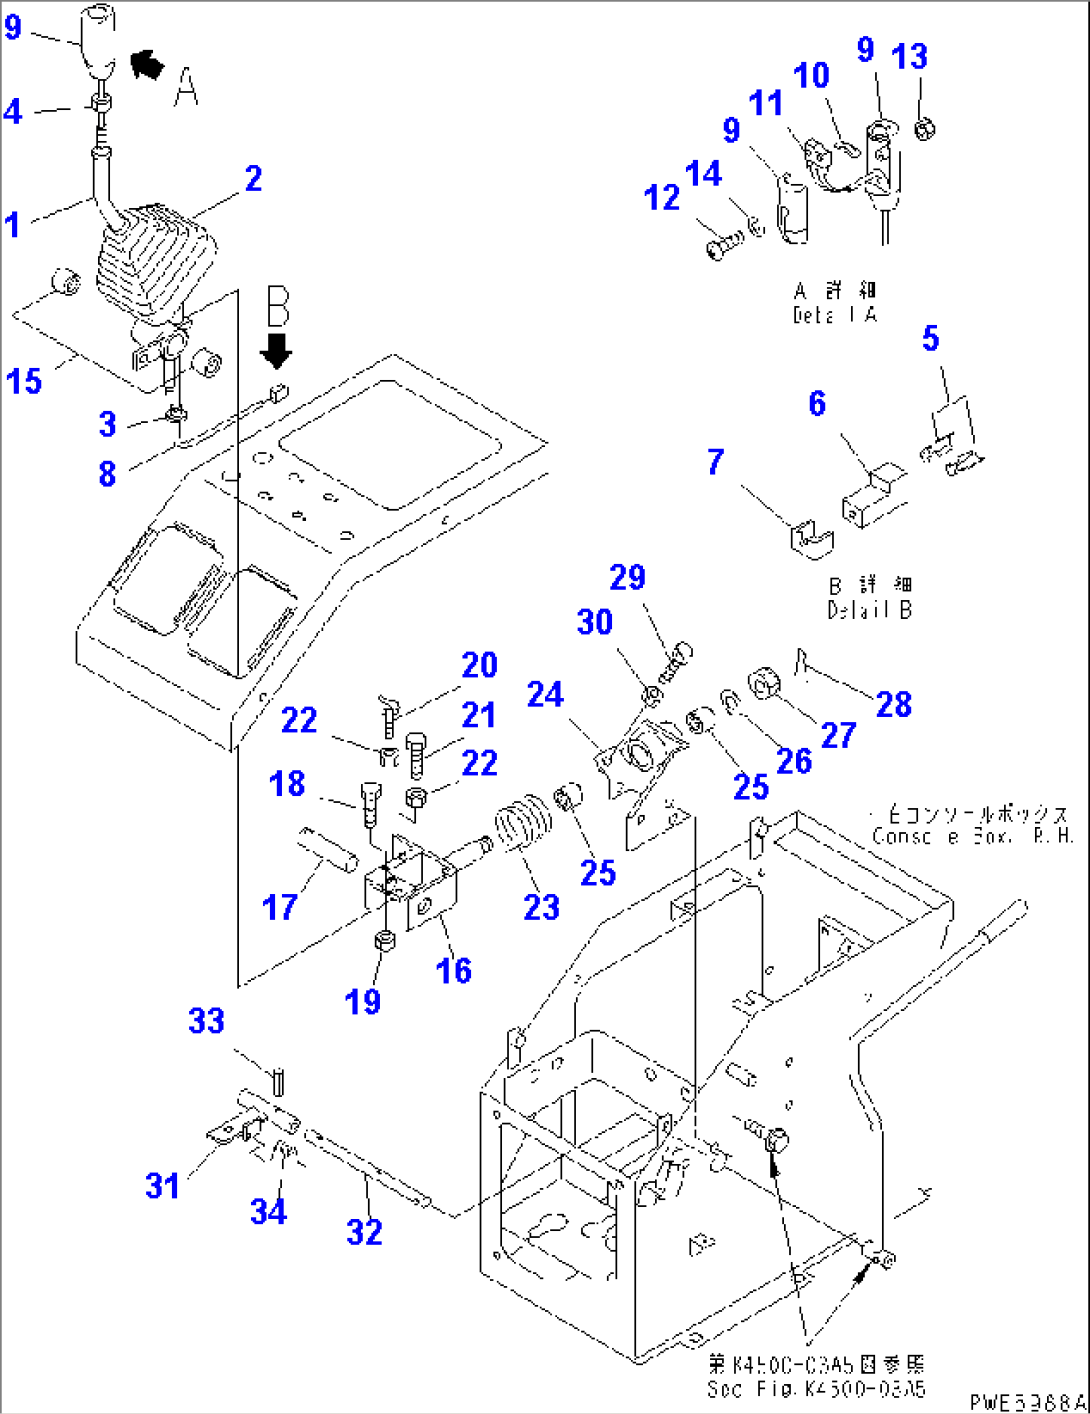 LOADER CONTROL (CONTROL LEVER) (WITH 4-SPOOL OR 5-SPOOL CONTROL VALVE)